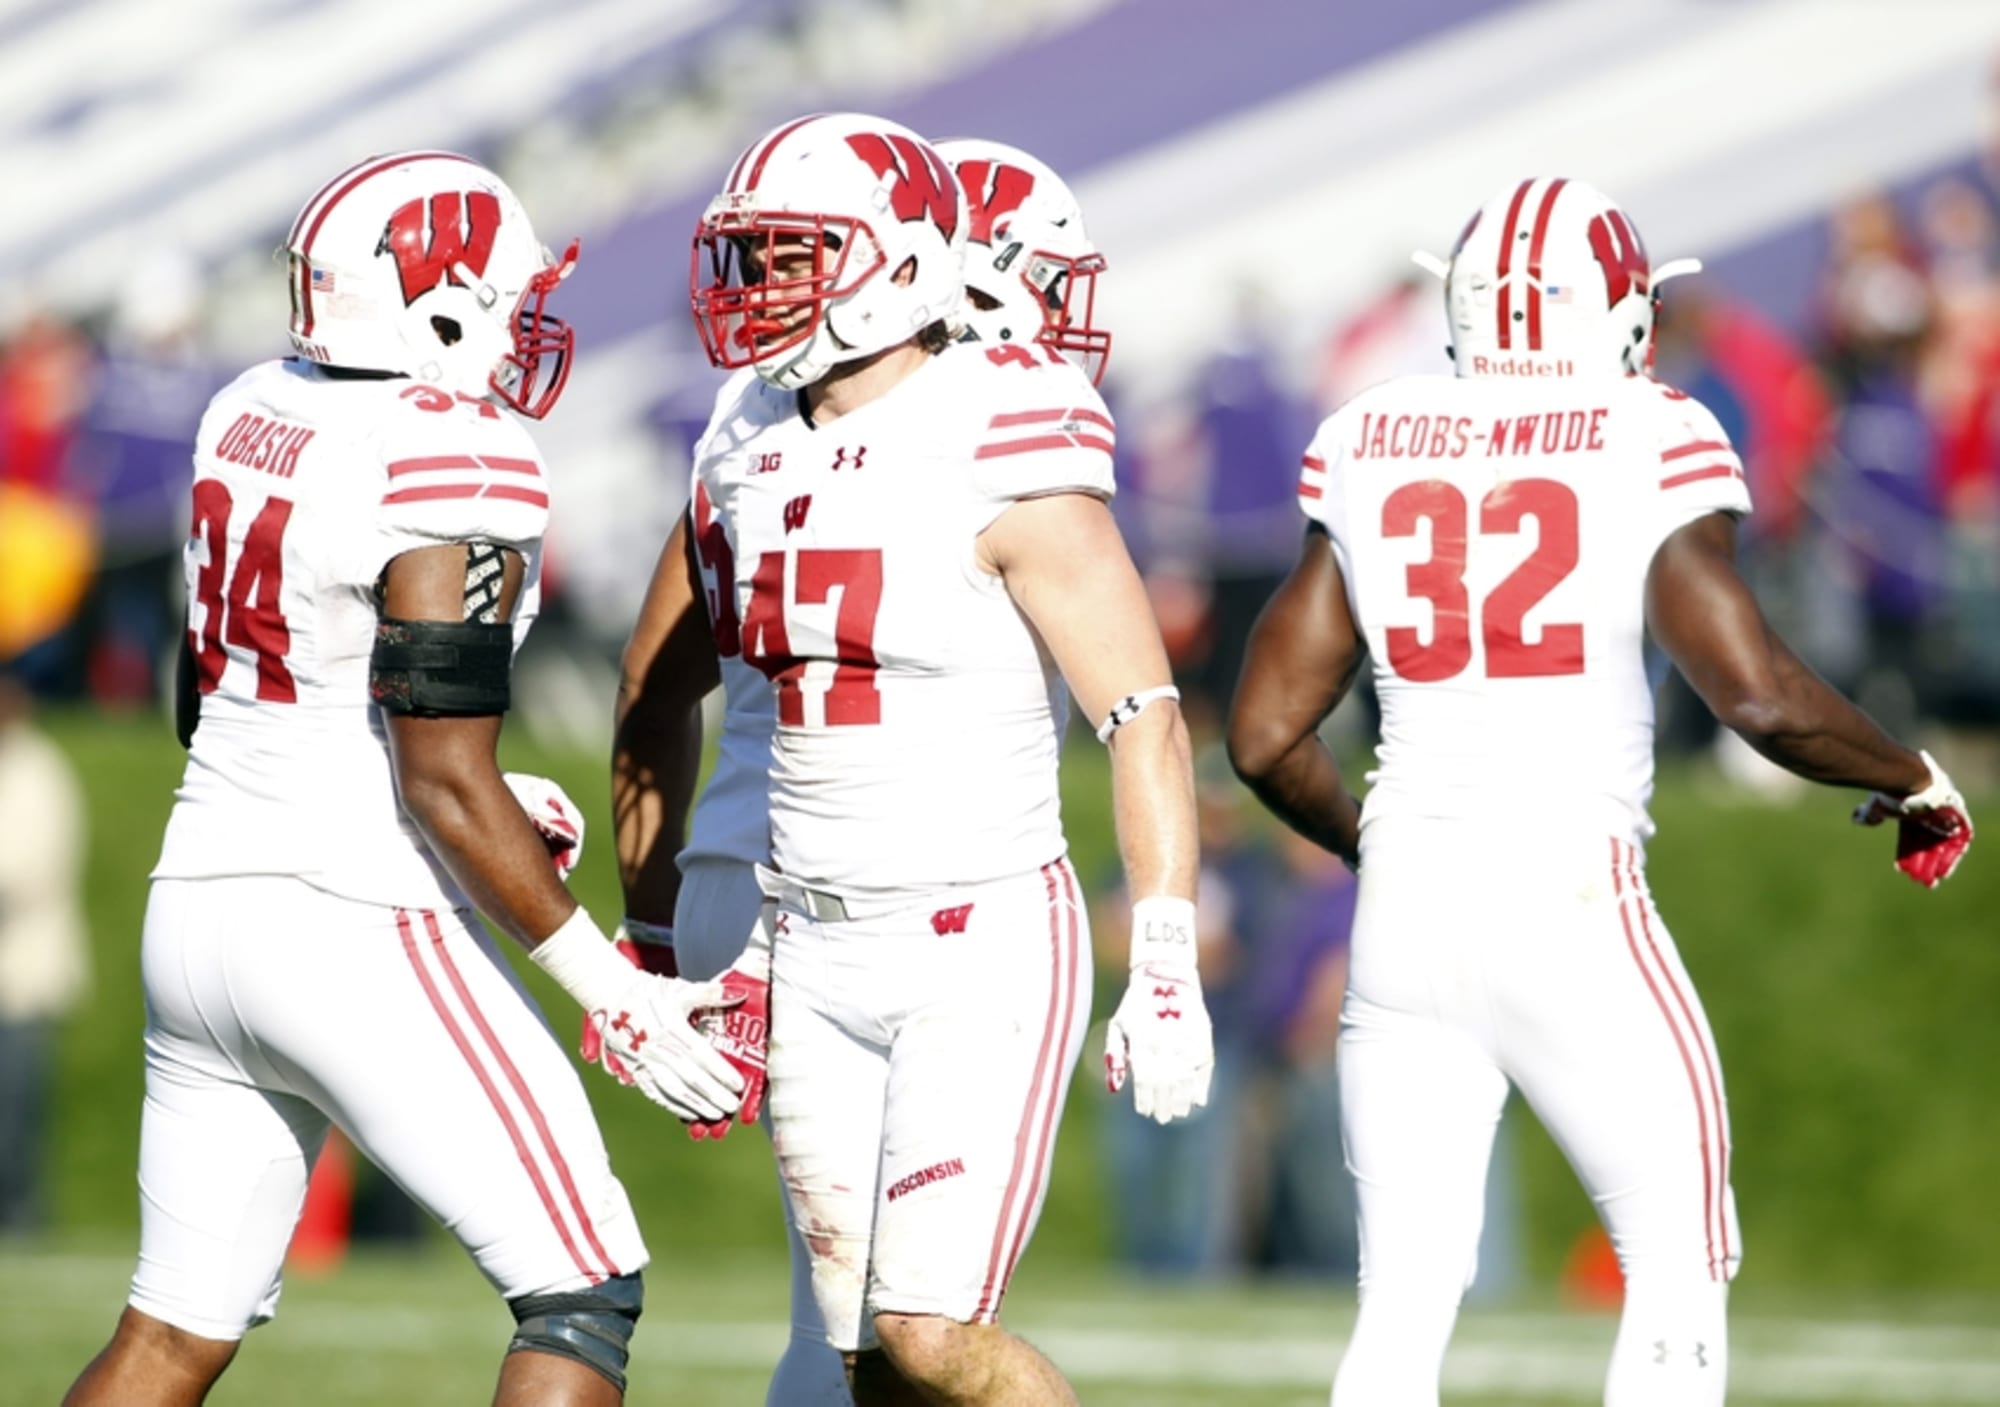 Wisconsin vs Illinois live stream How to watch online